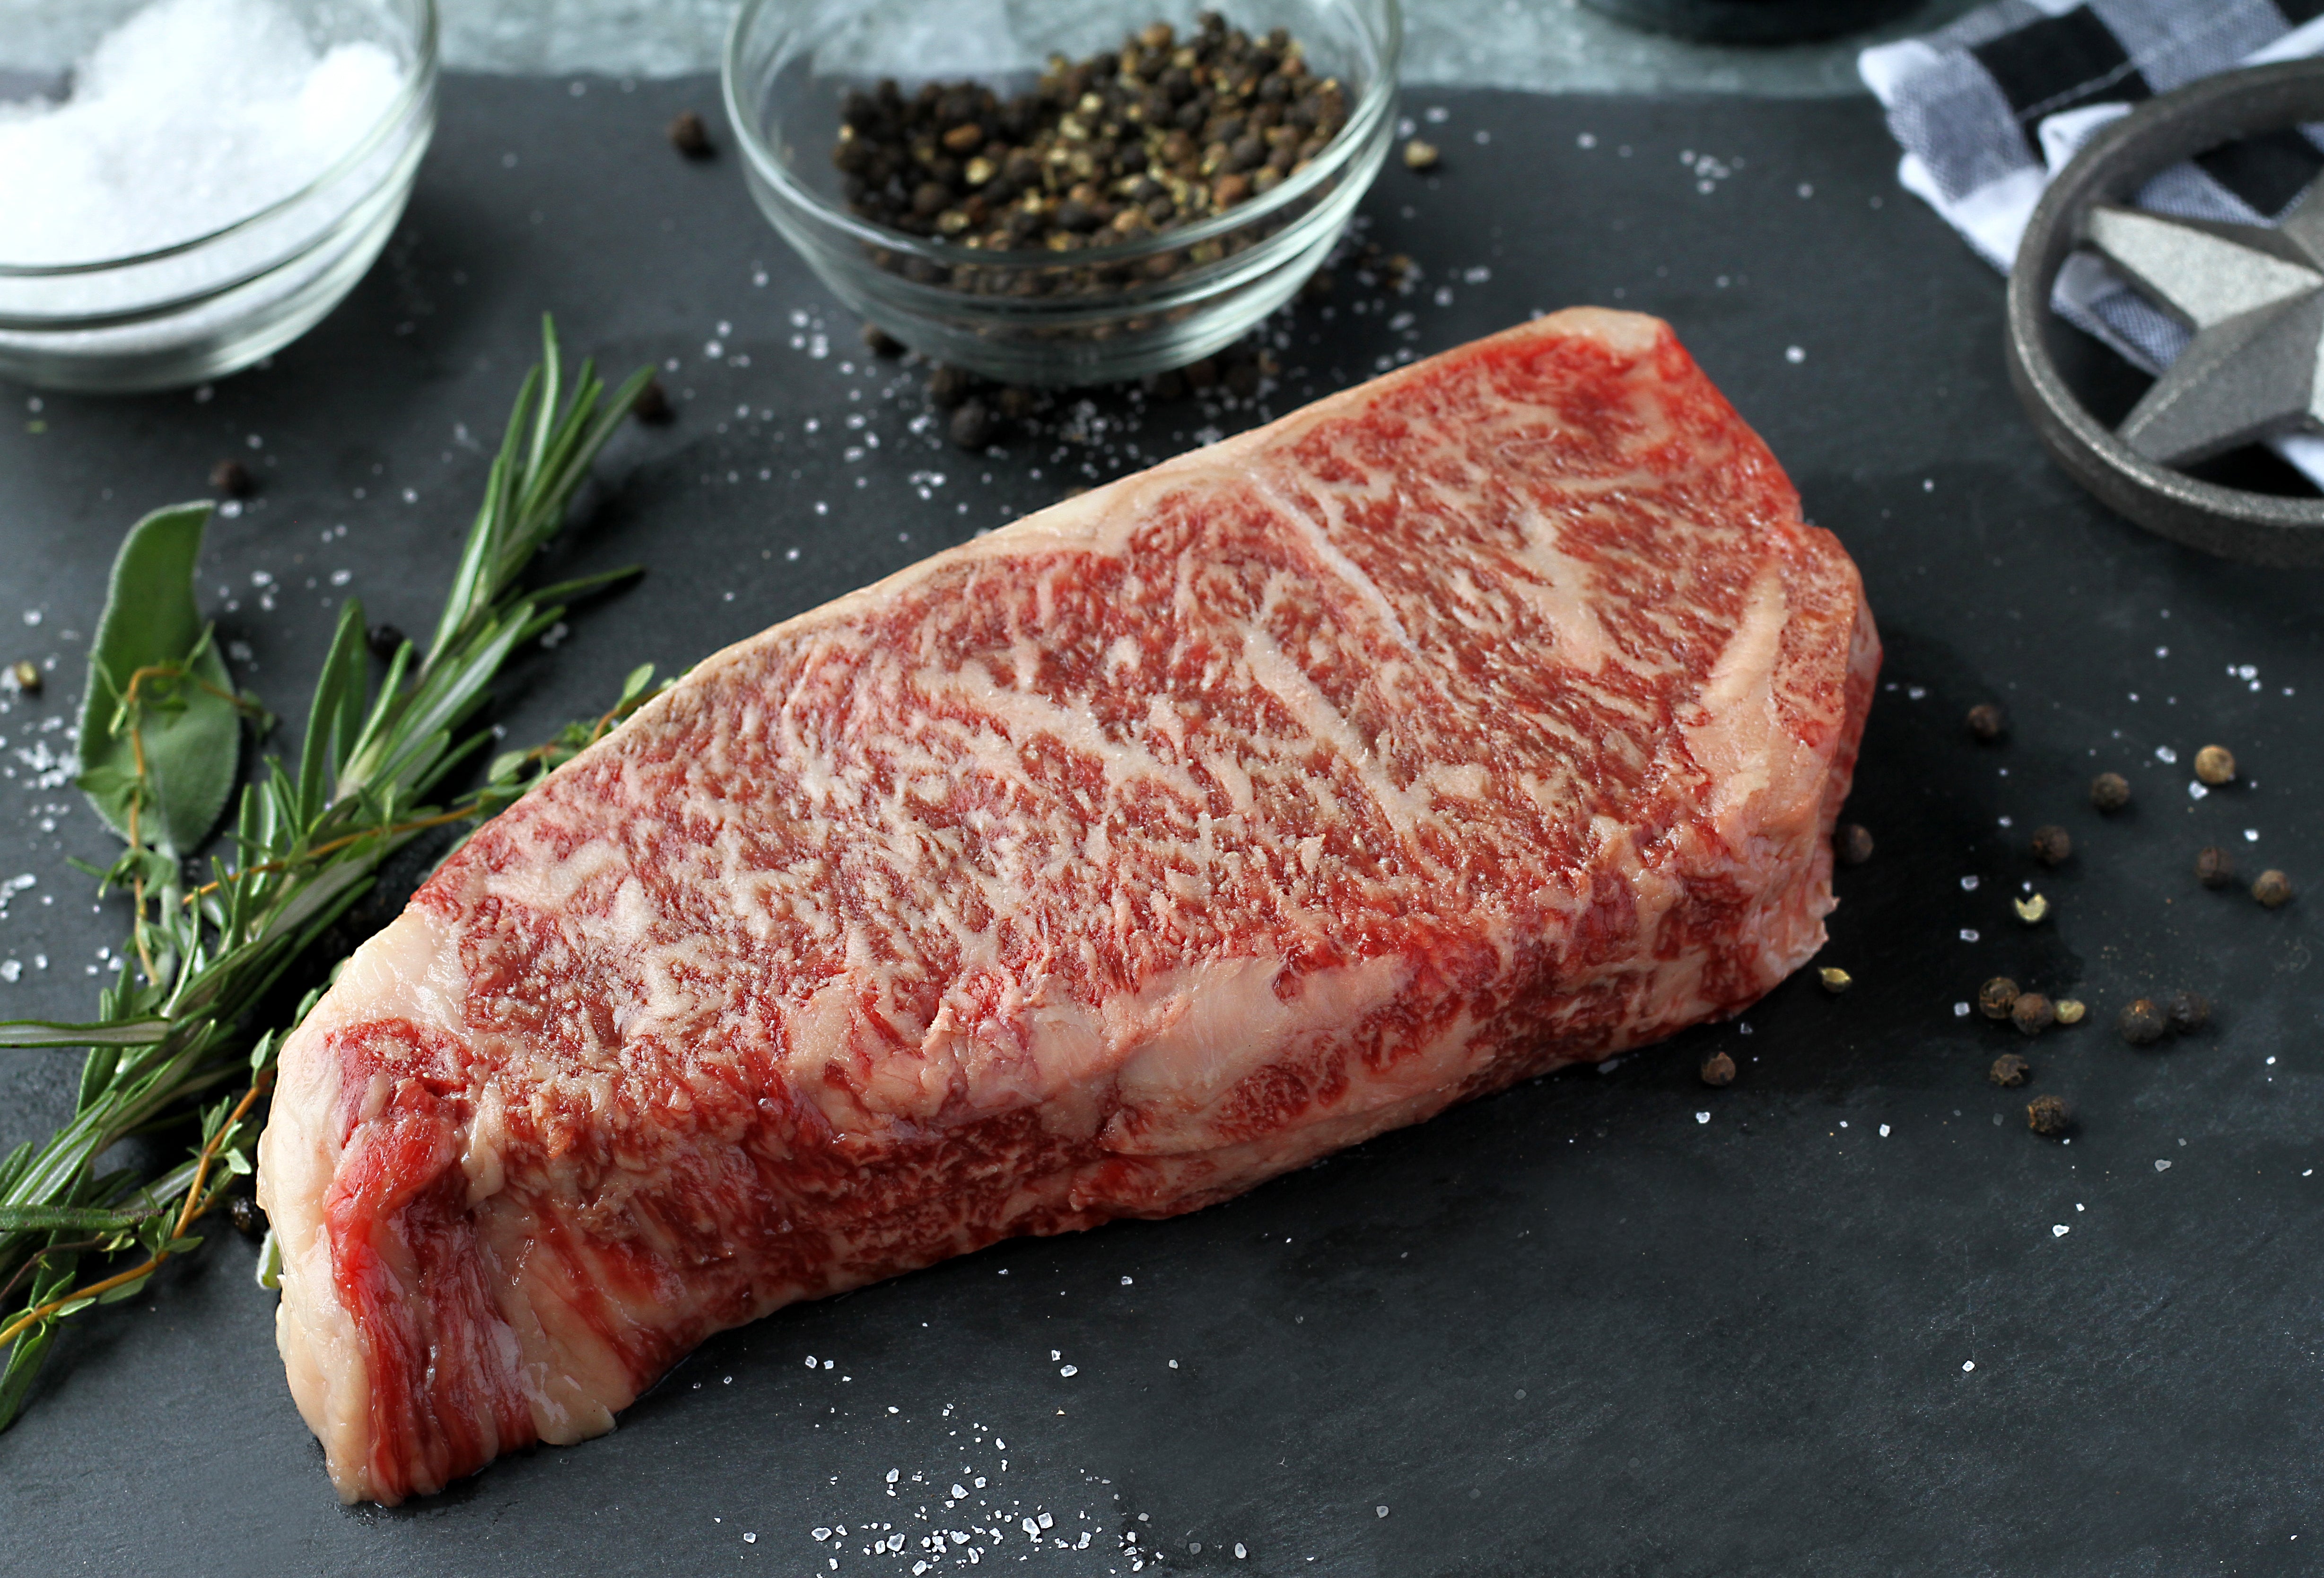 Texas Craft Wagyu dry aged Wagyu NY Strip (Striploin). Craft steaks. Dallas delivery.